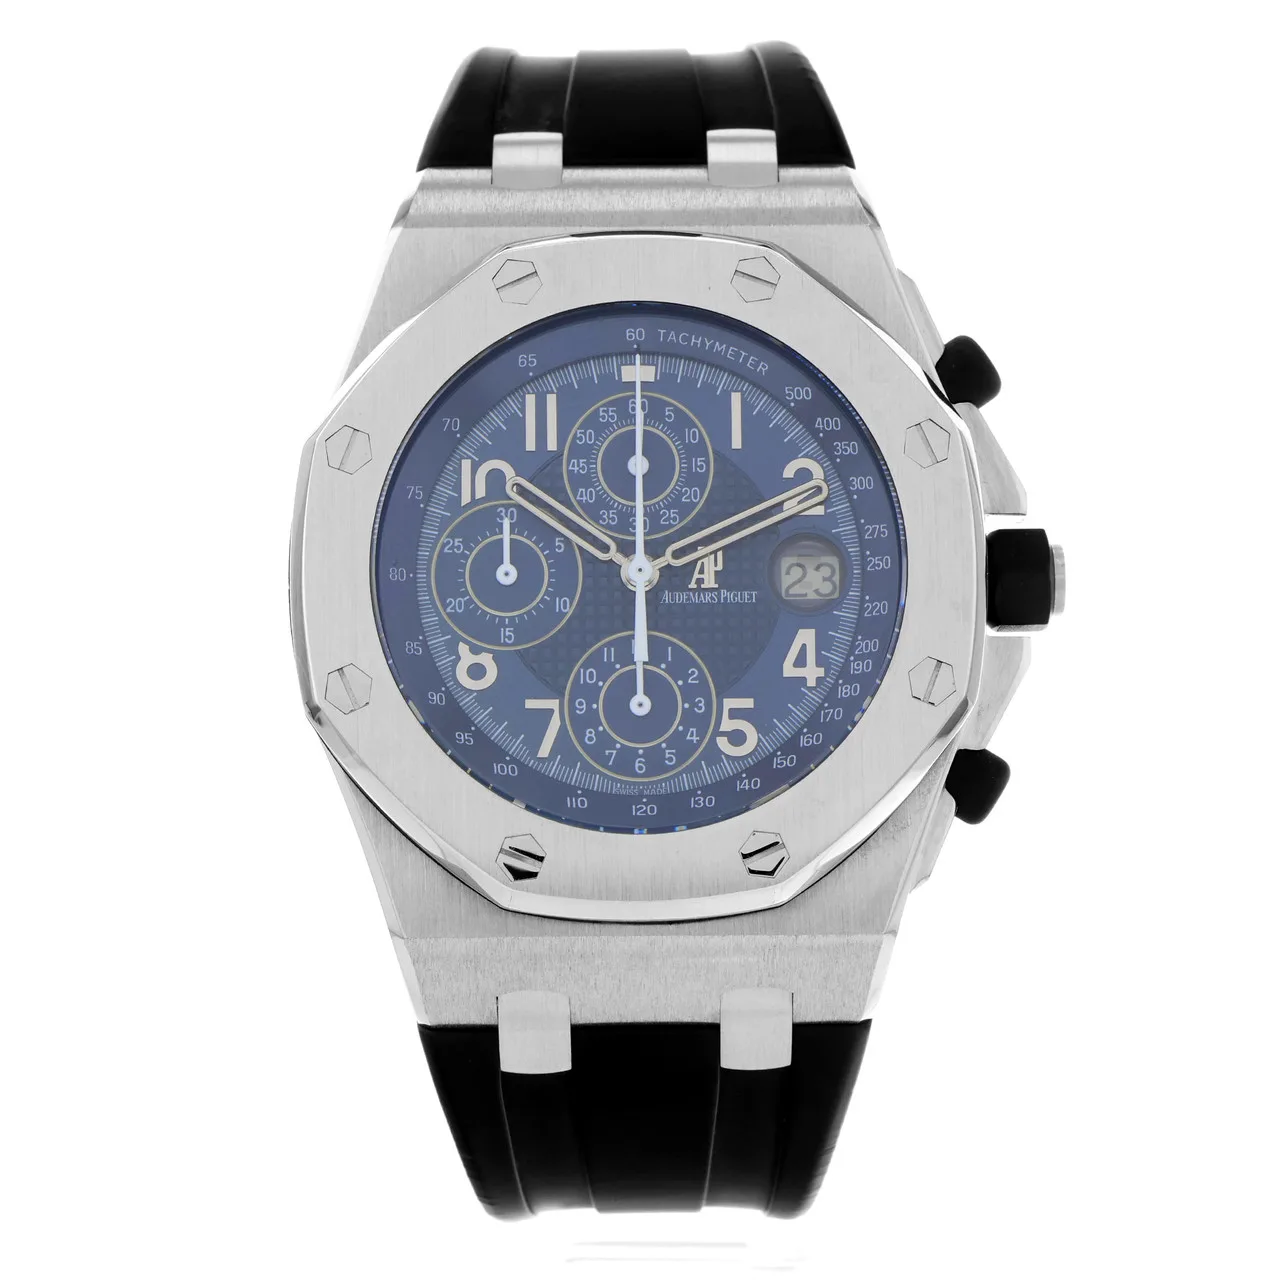 2005 Audemars Piguet Royal Oak Offshore Chronograph 42 White Gold - Pride of Russia - Limited to 50 Pieces 26061BC.OO.D028CR.01 Listing Image 1